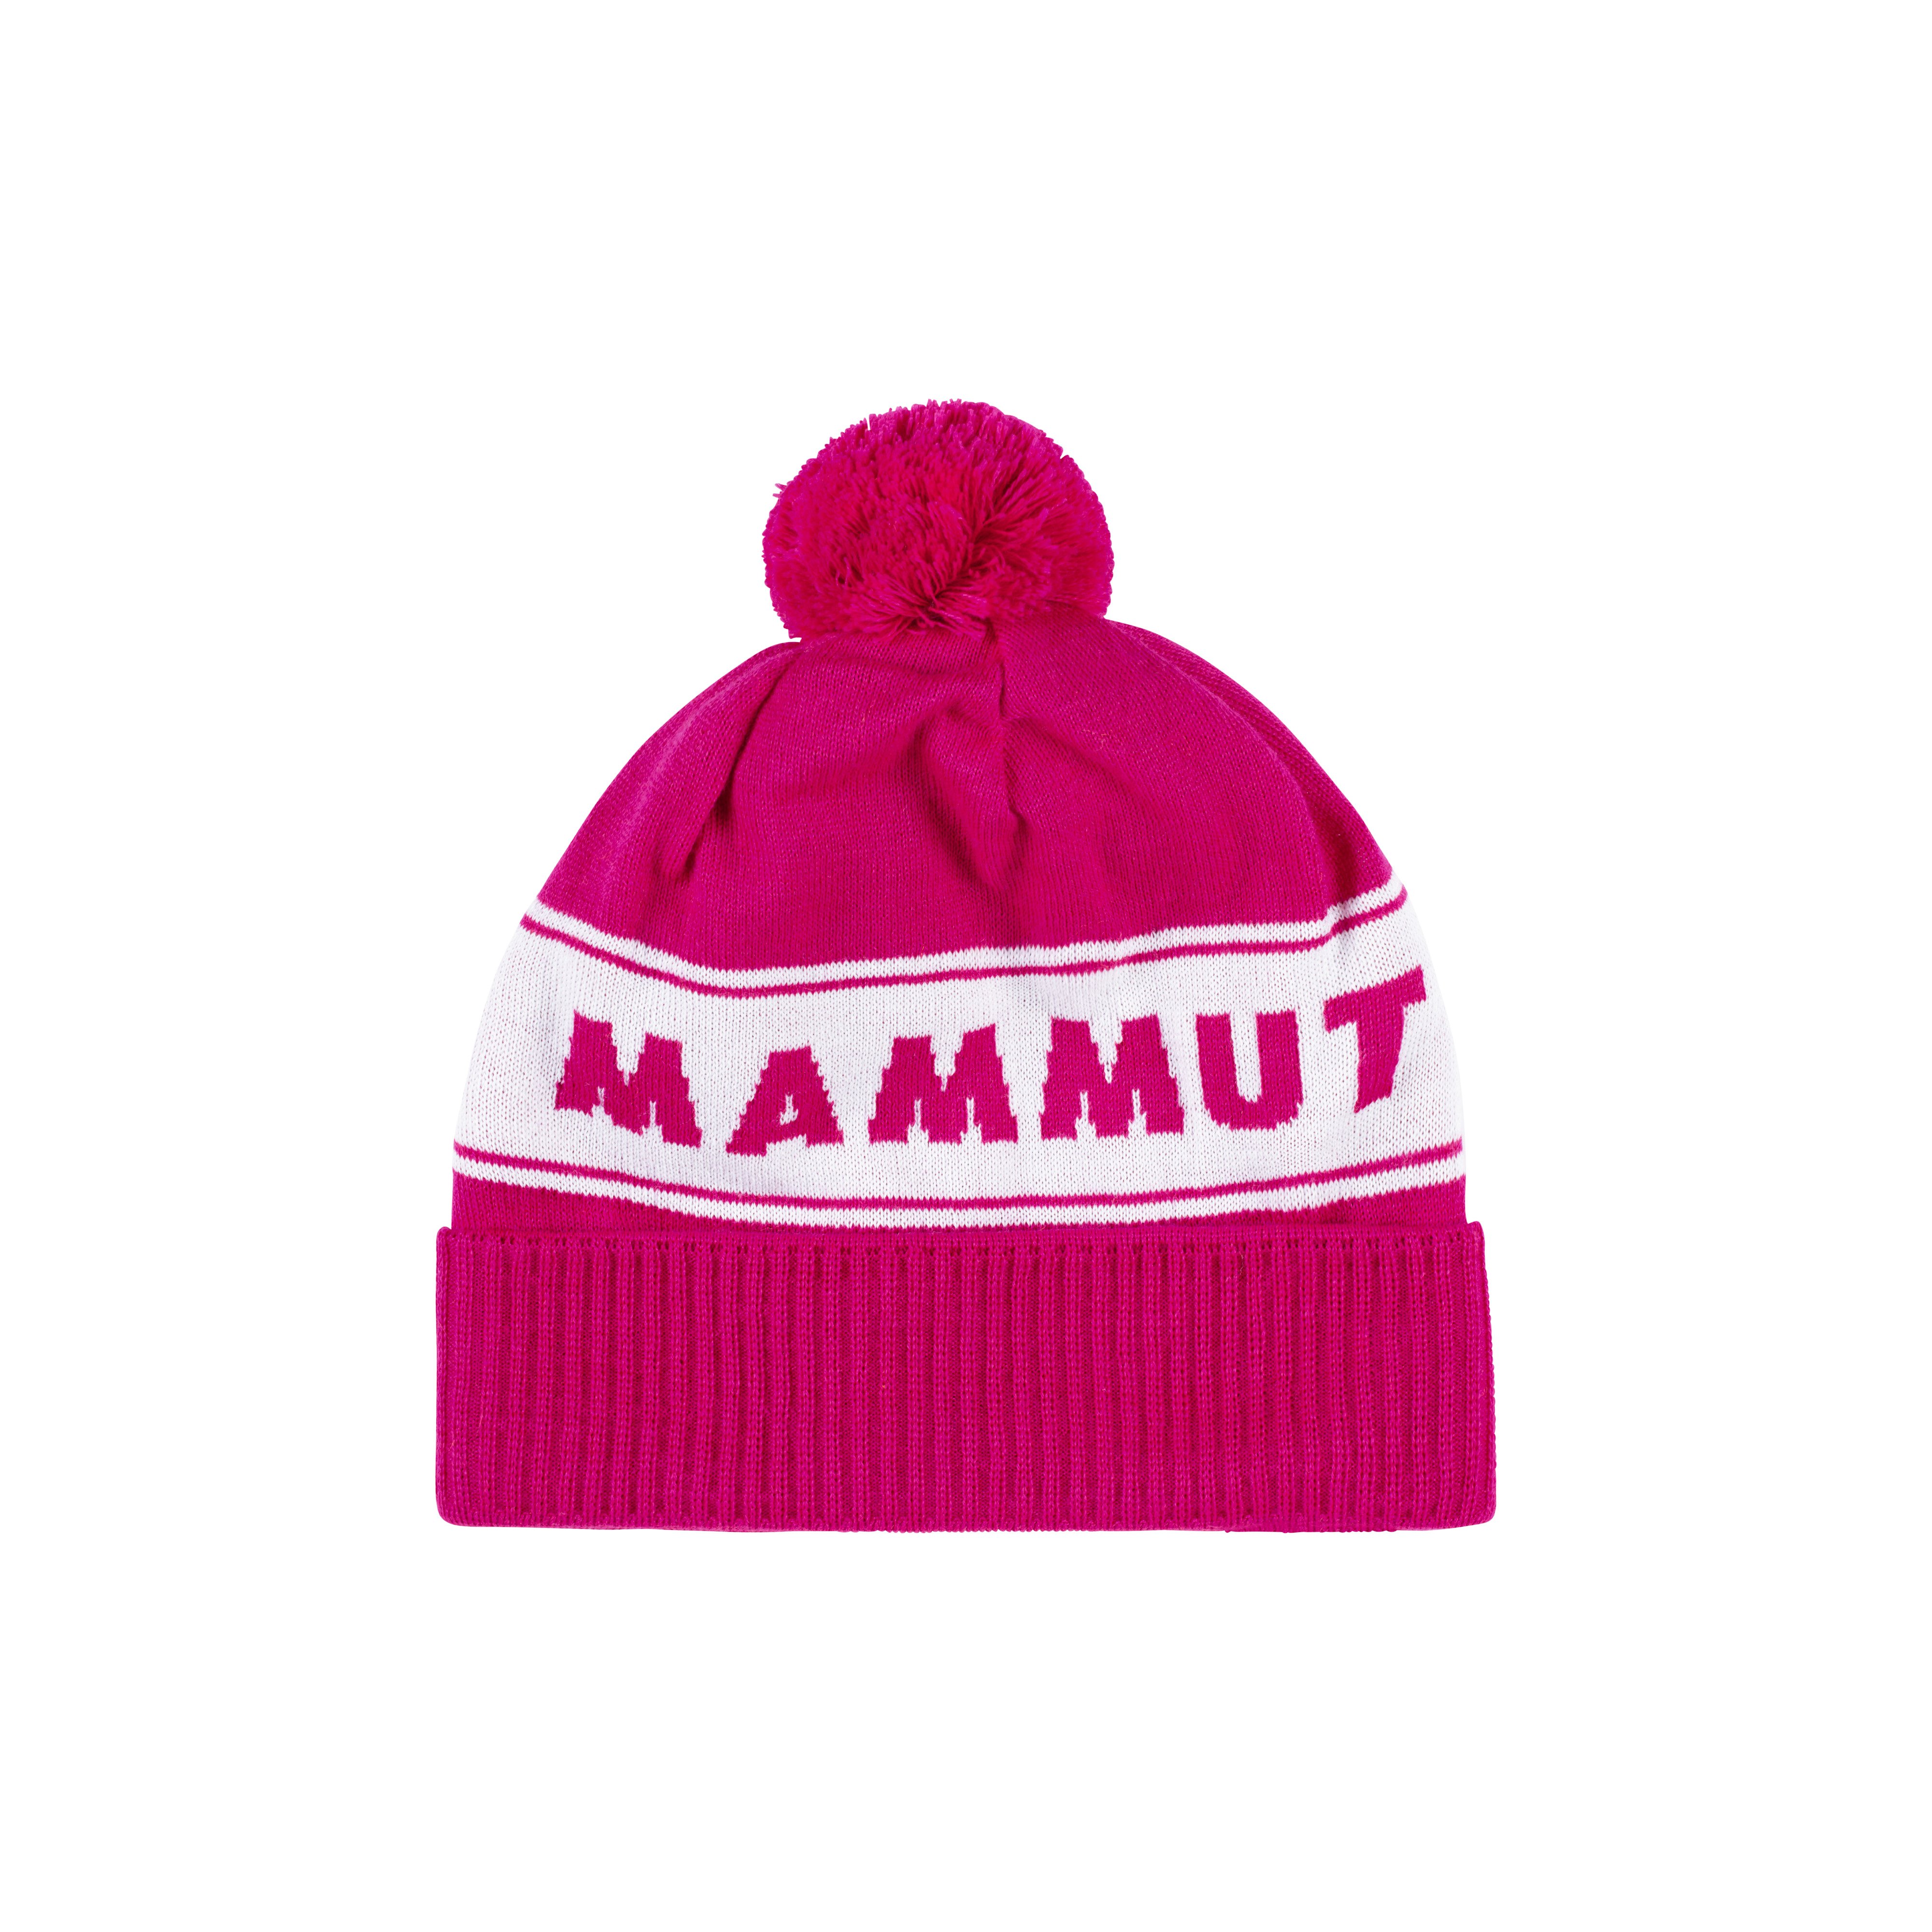 Peaks Beanie - pink-white, one size product image